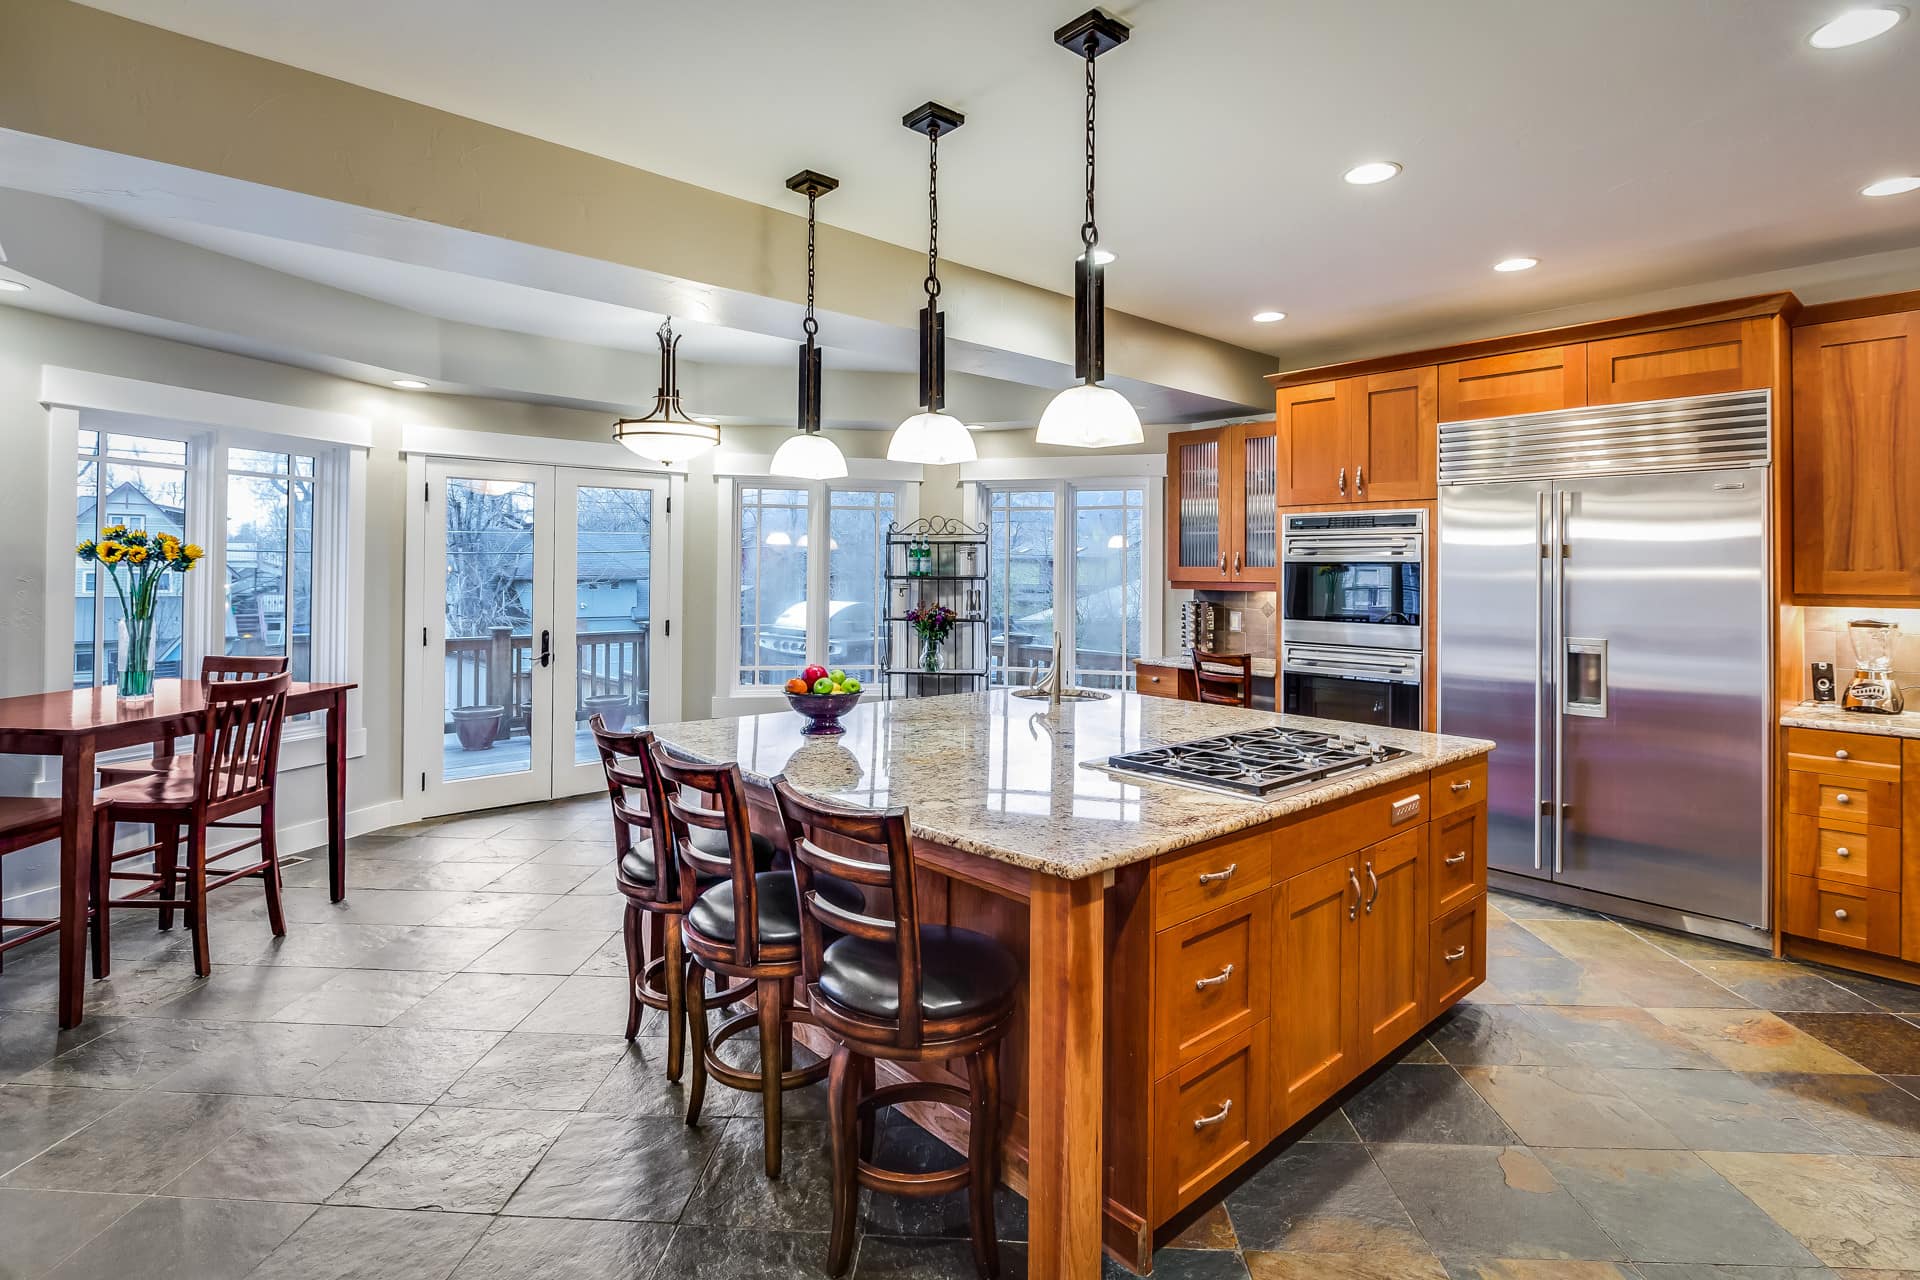 This is a kitchen with a large, square-shaped island and built-in refrigerator.